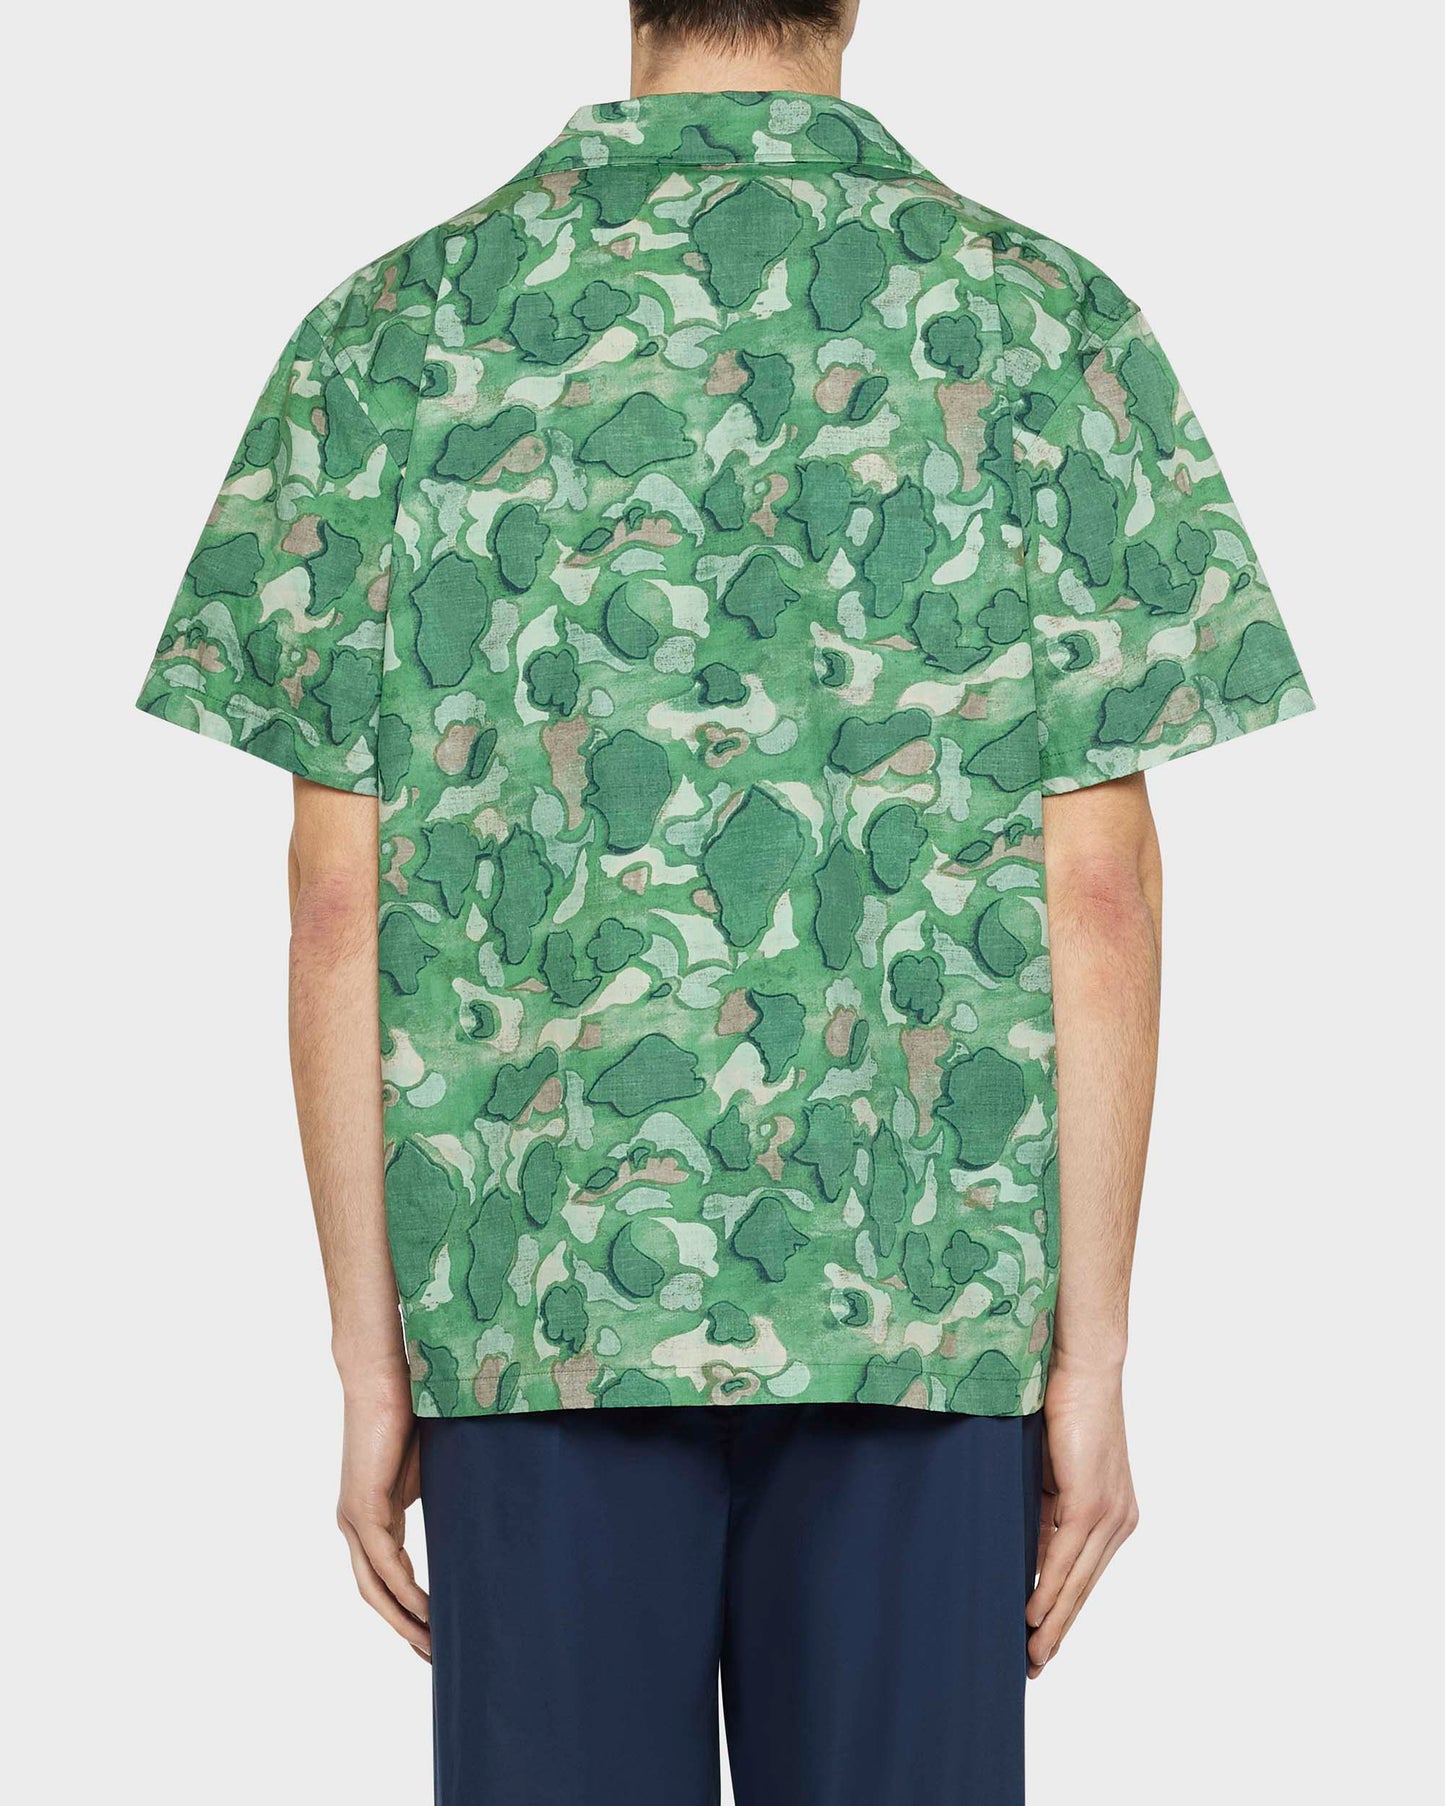 Digital camicia bowling camouflage